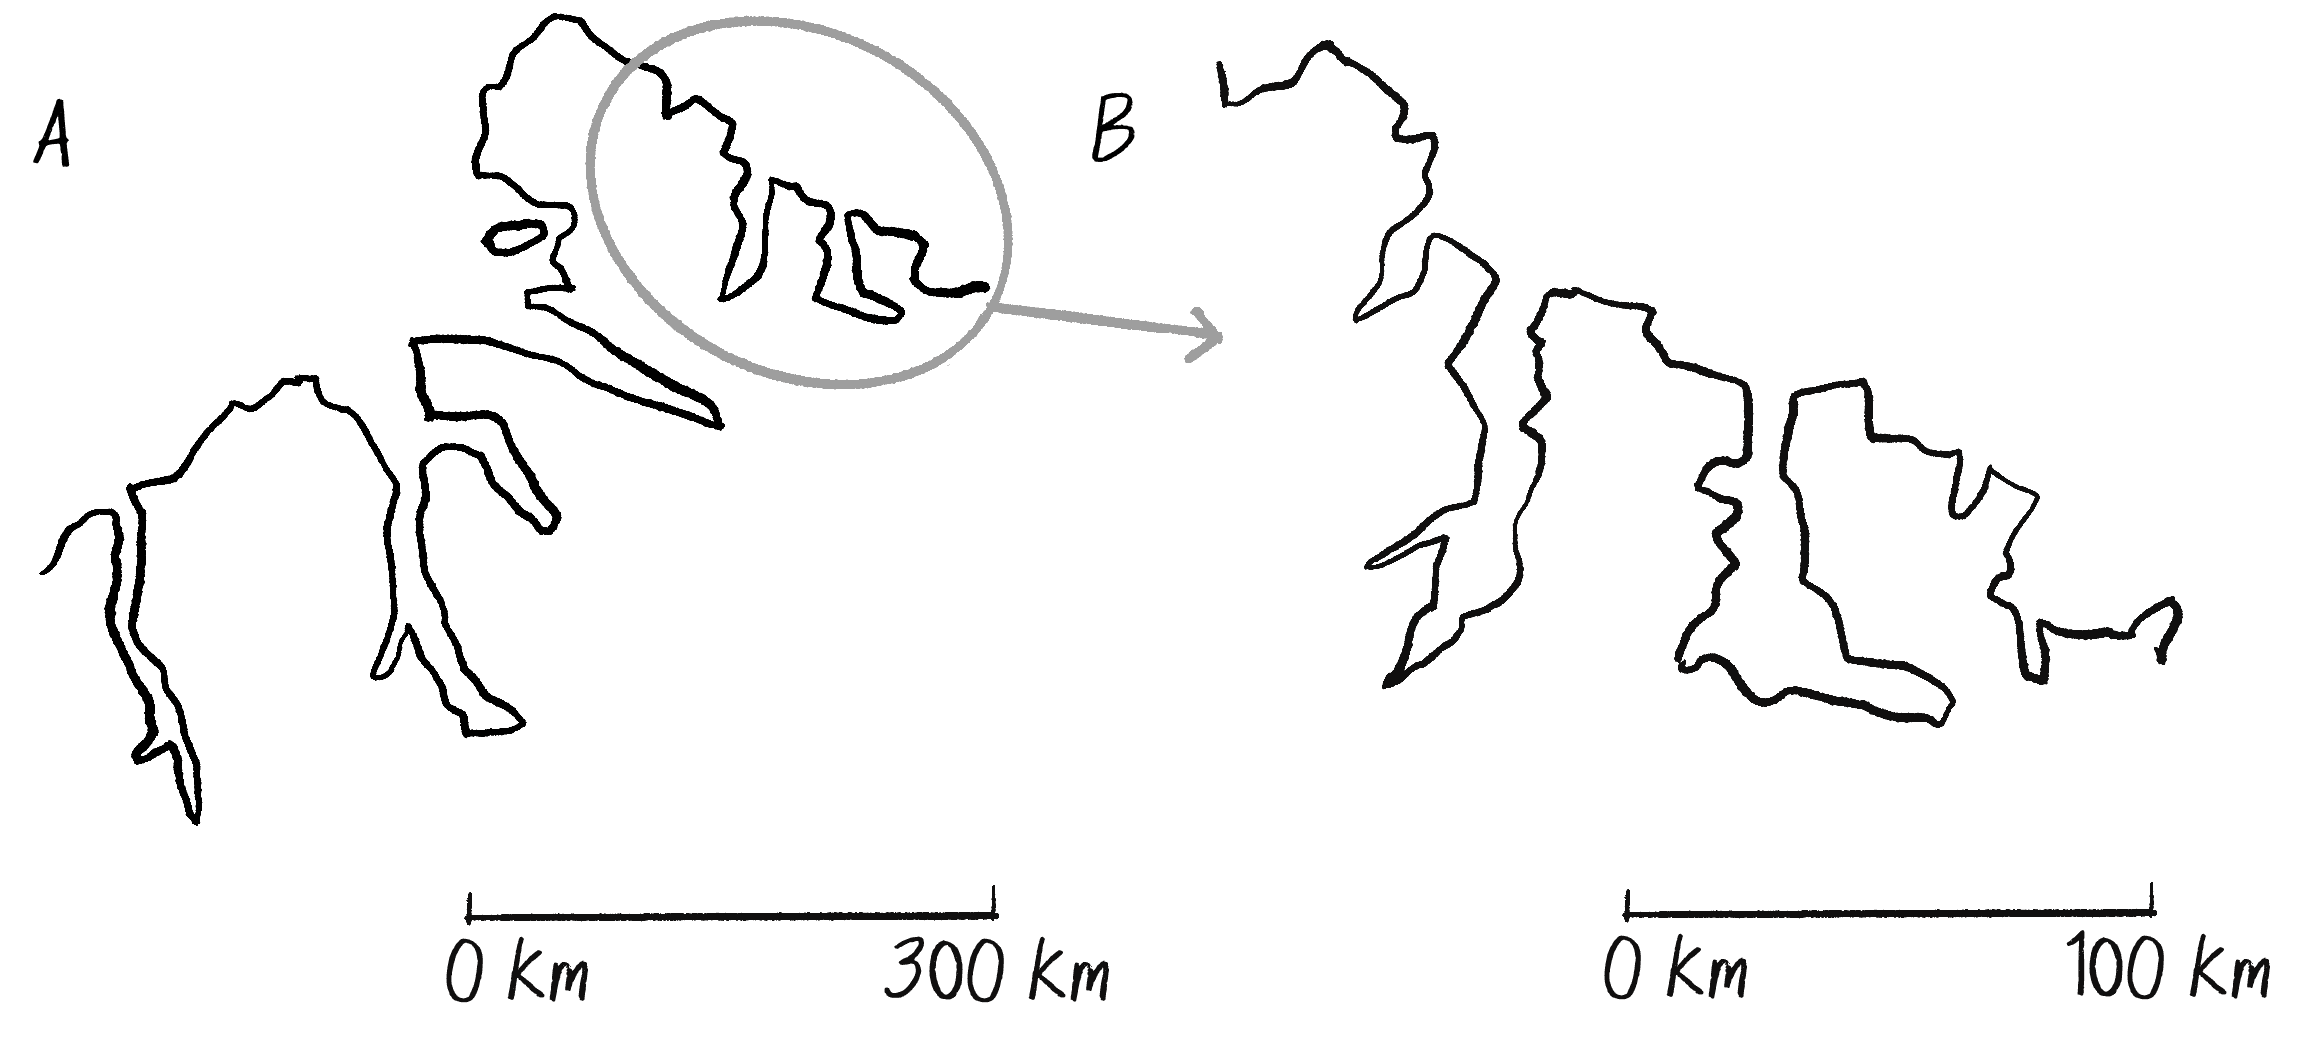 Figure 8.5: Two coastlines, with scale